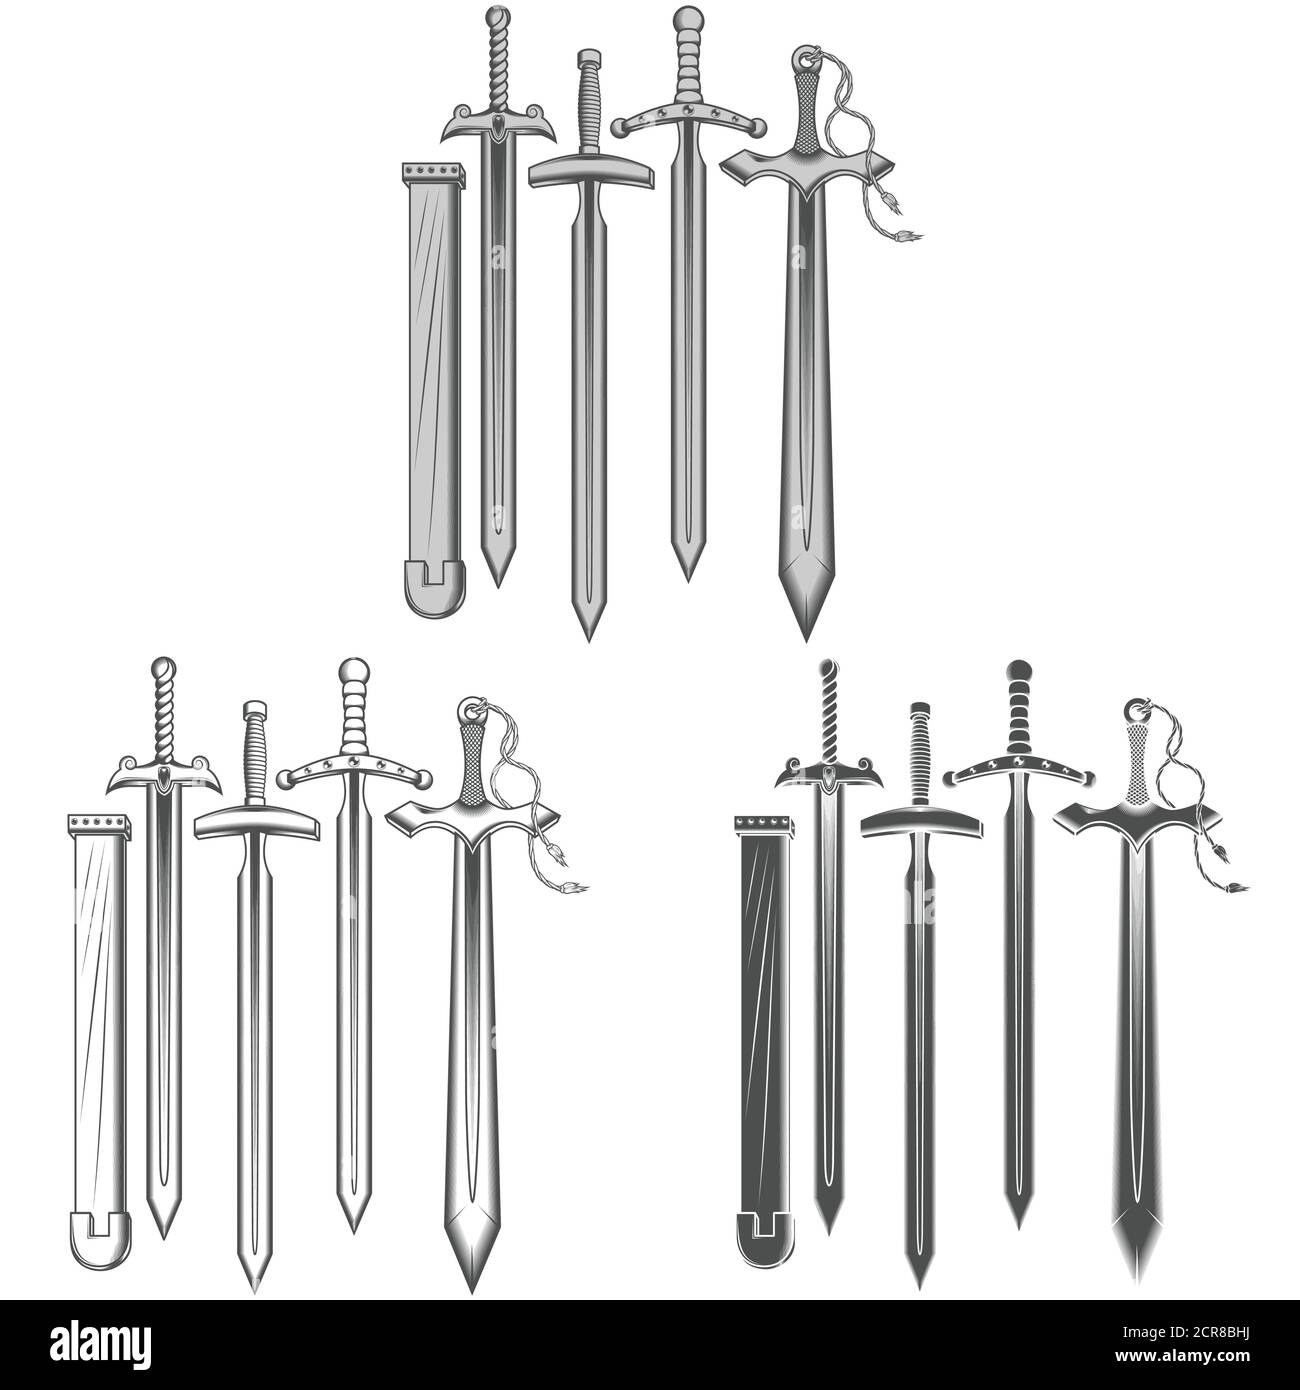 Illustration of four grayscale sword styles with scabbard, all on white background. Stock Vector